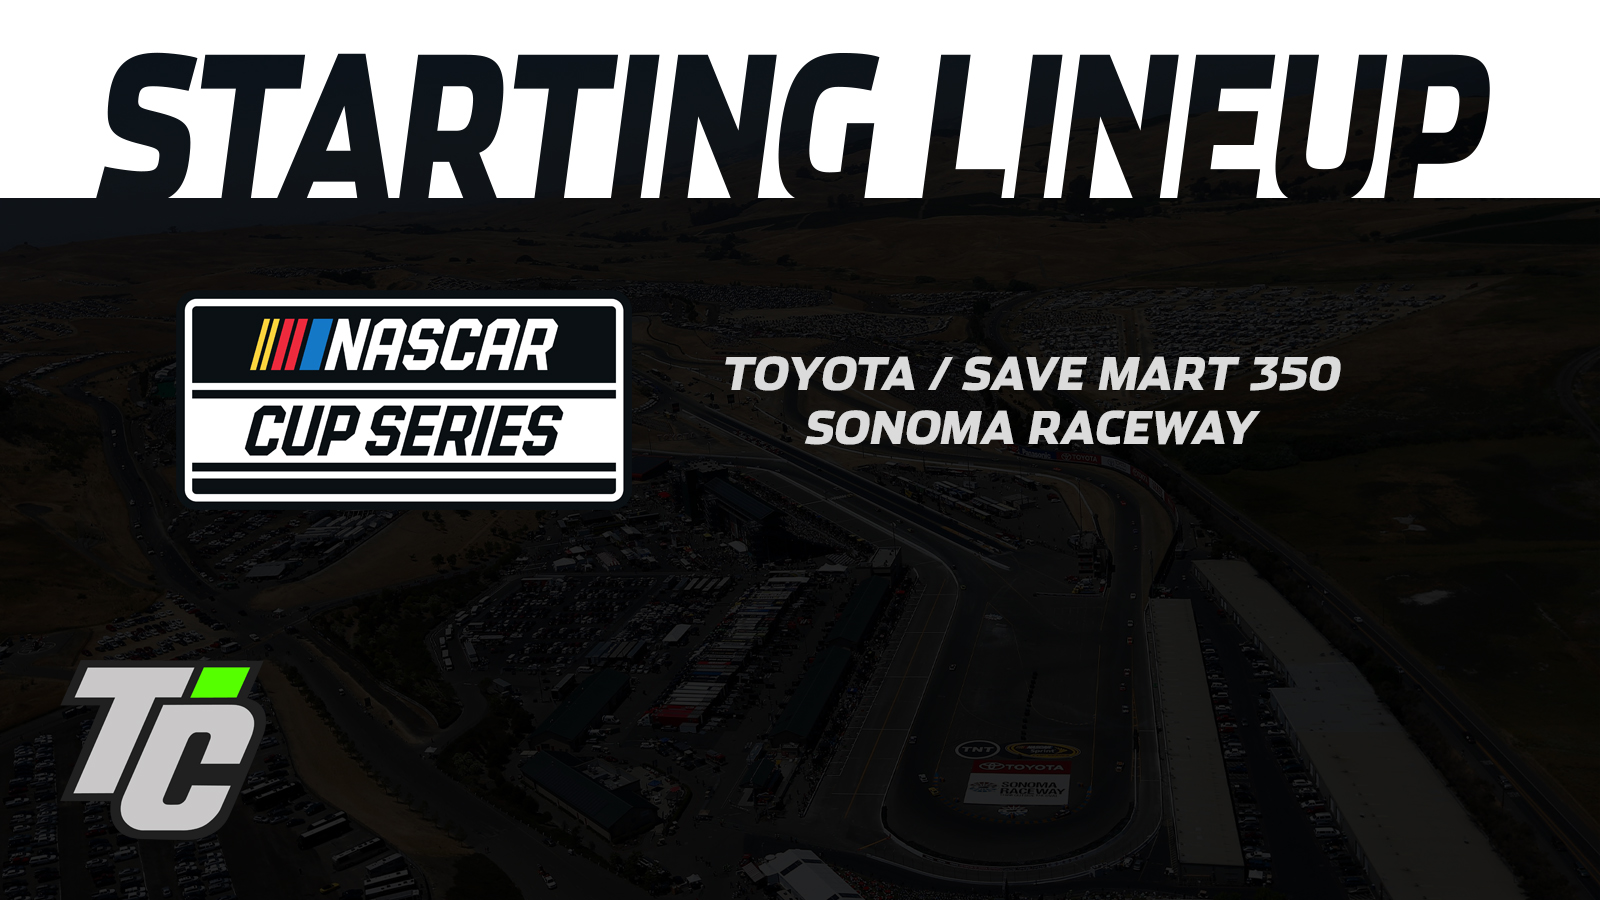 NASCAR Cup Series starting lineup Toyota / Save Mart 350 at Sonoma Raceway